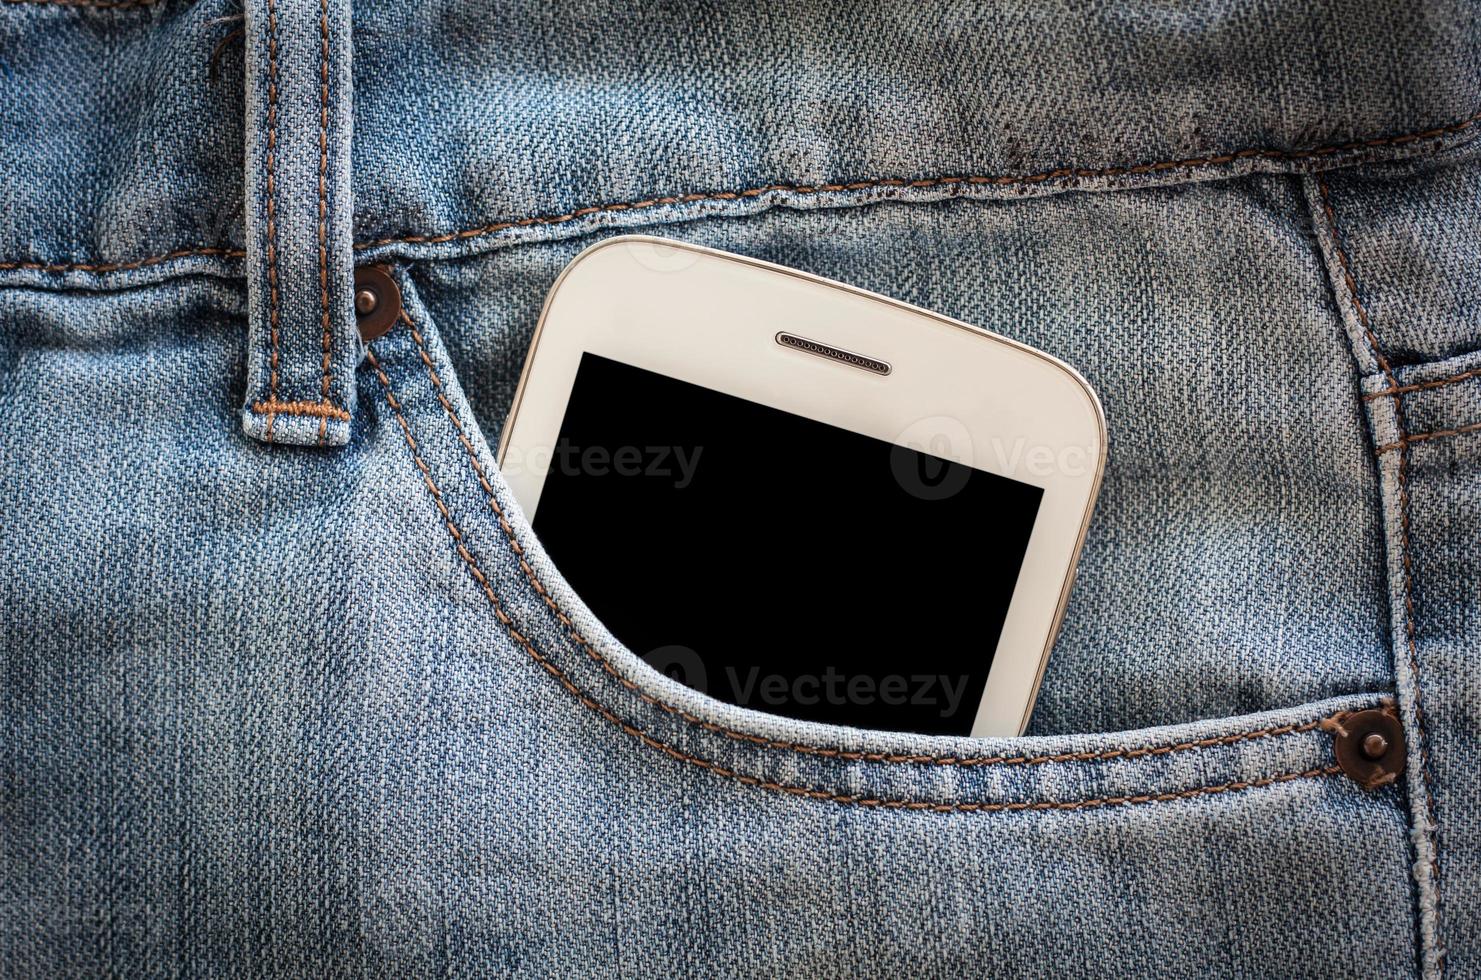 mobile phone in jeans pocket with black screen photo